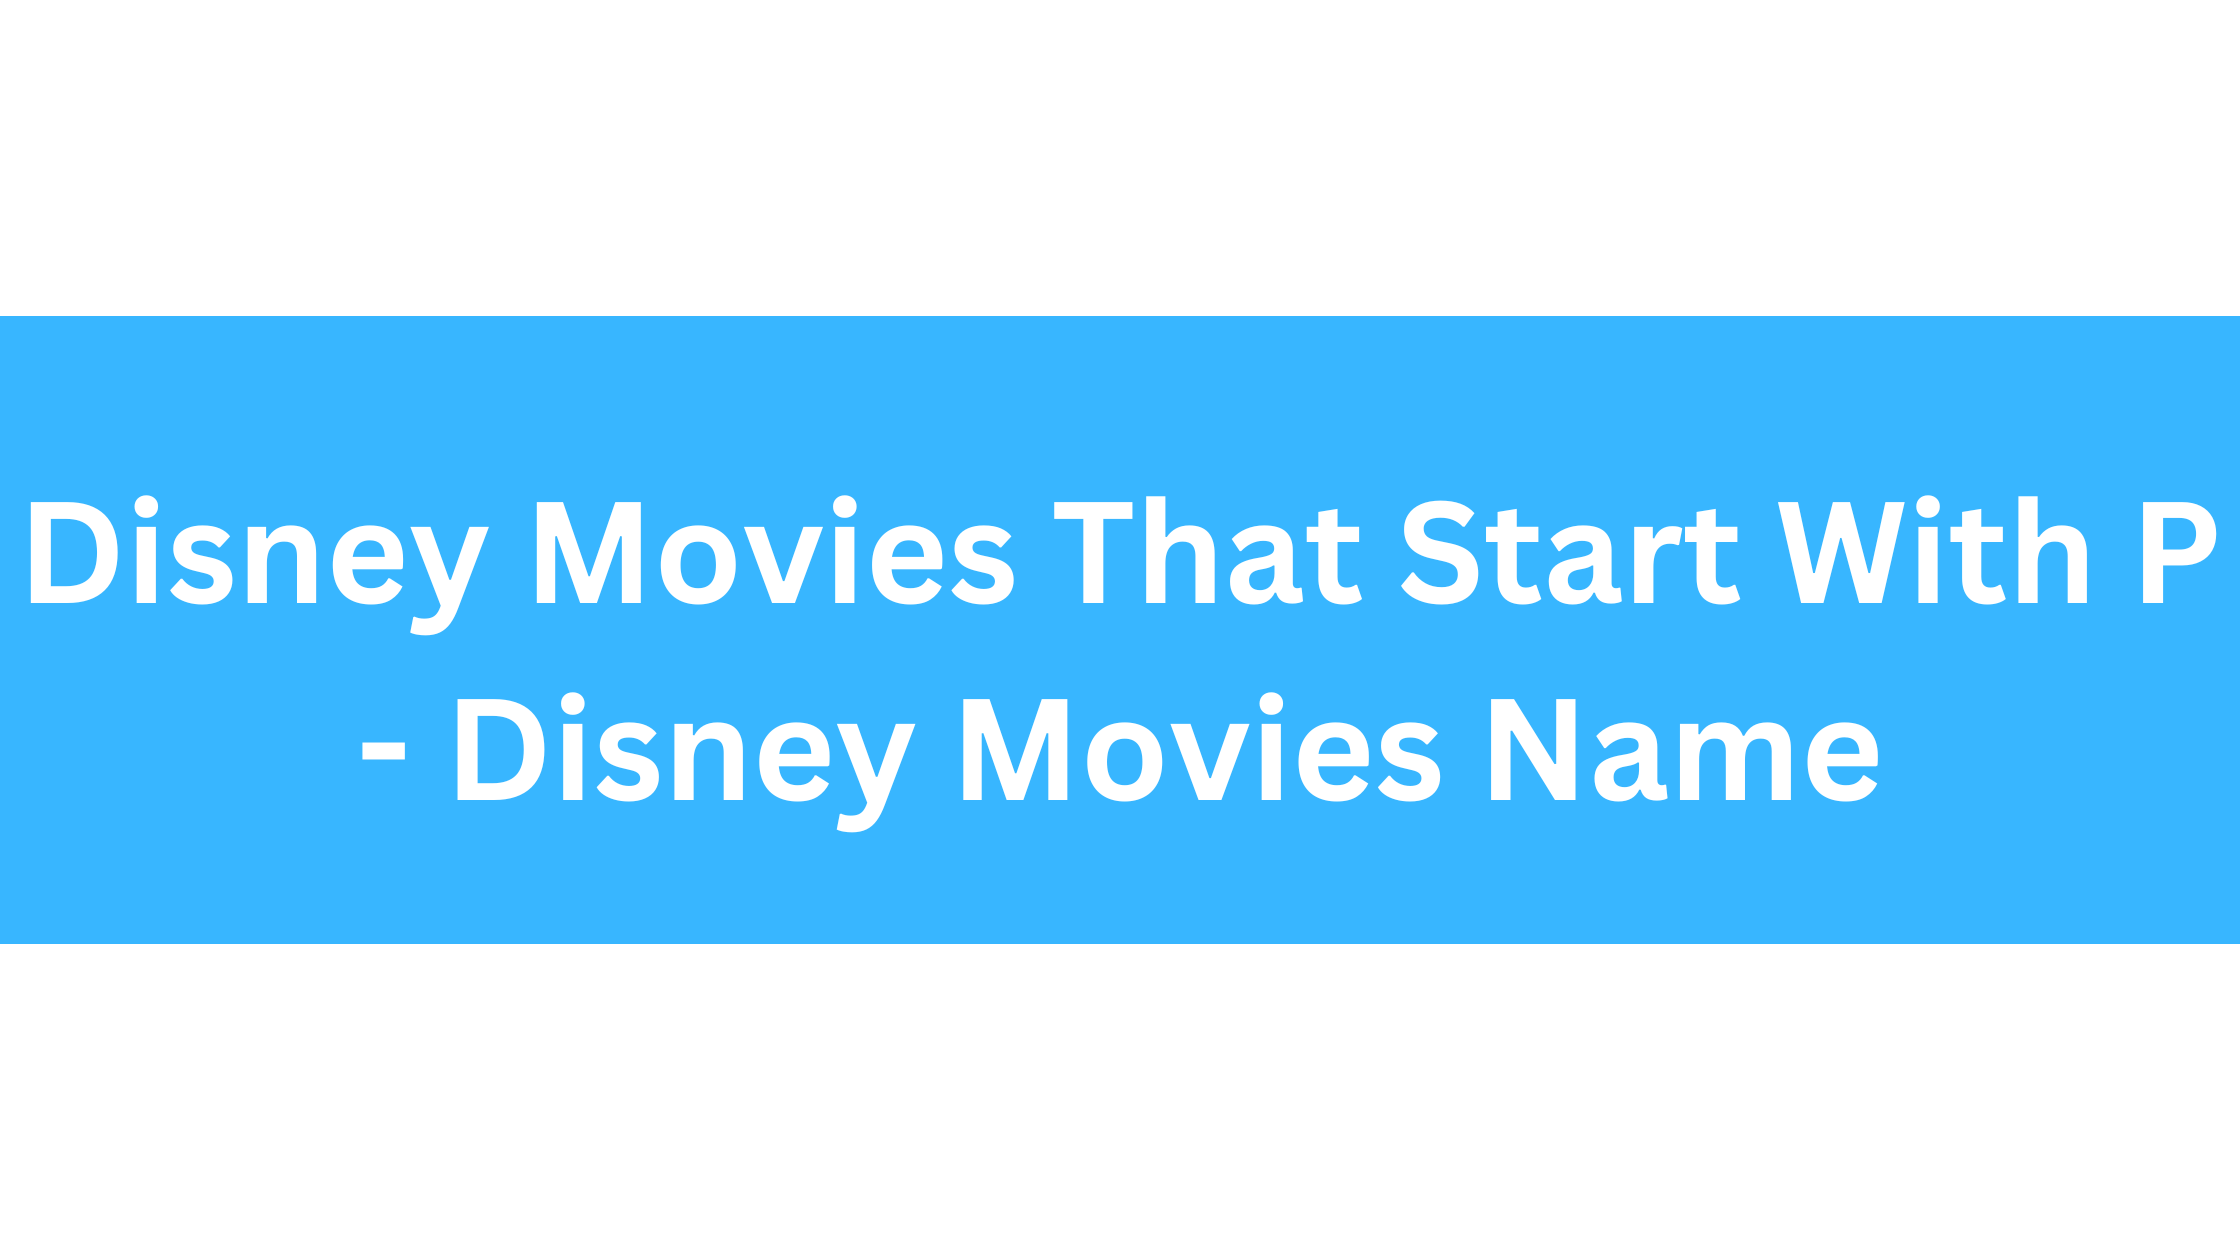 Disney Movies That Start With P